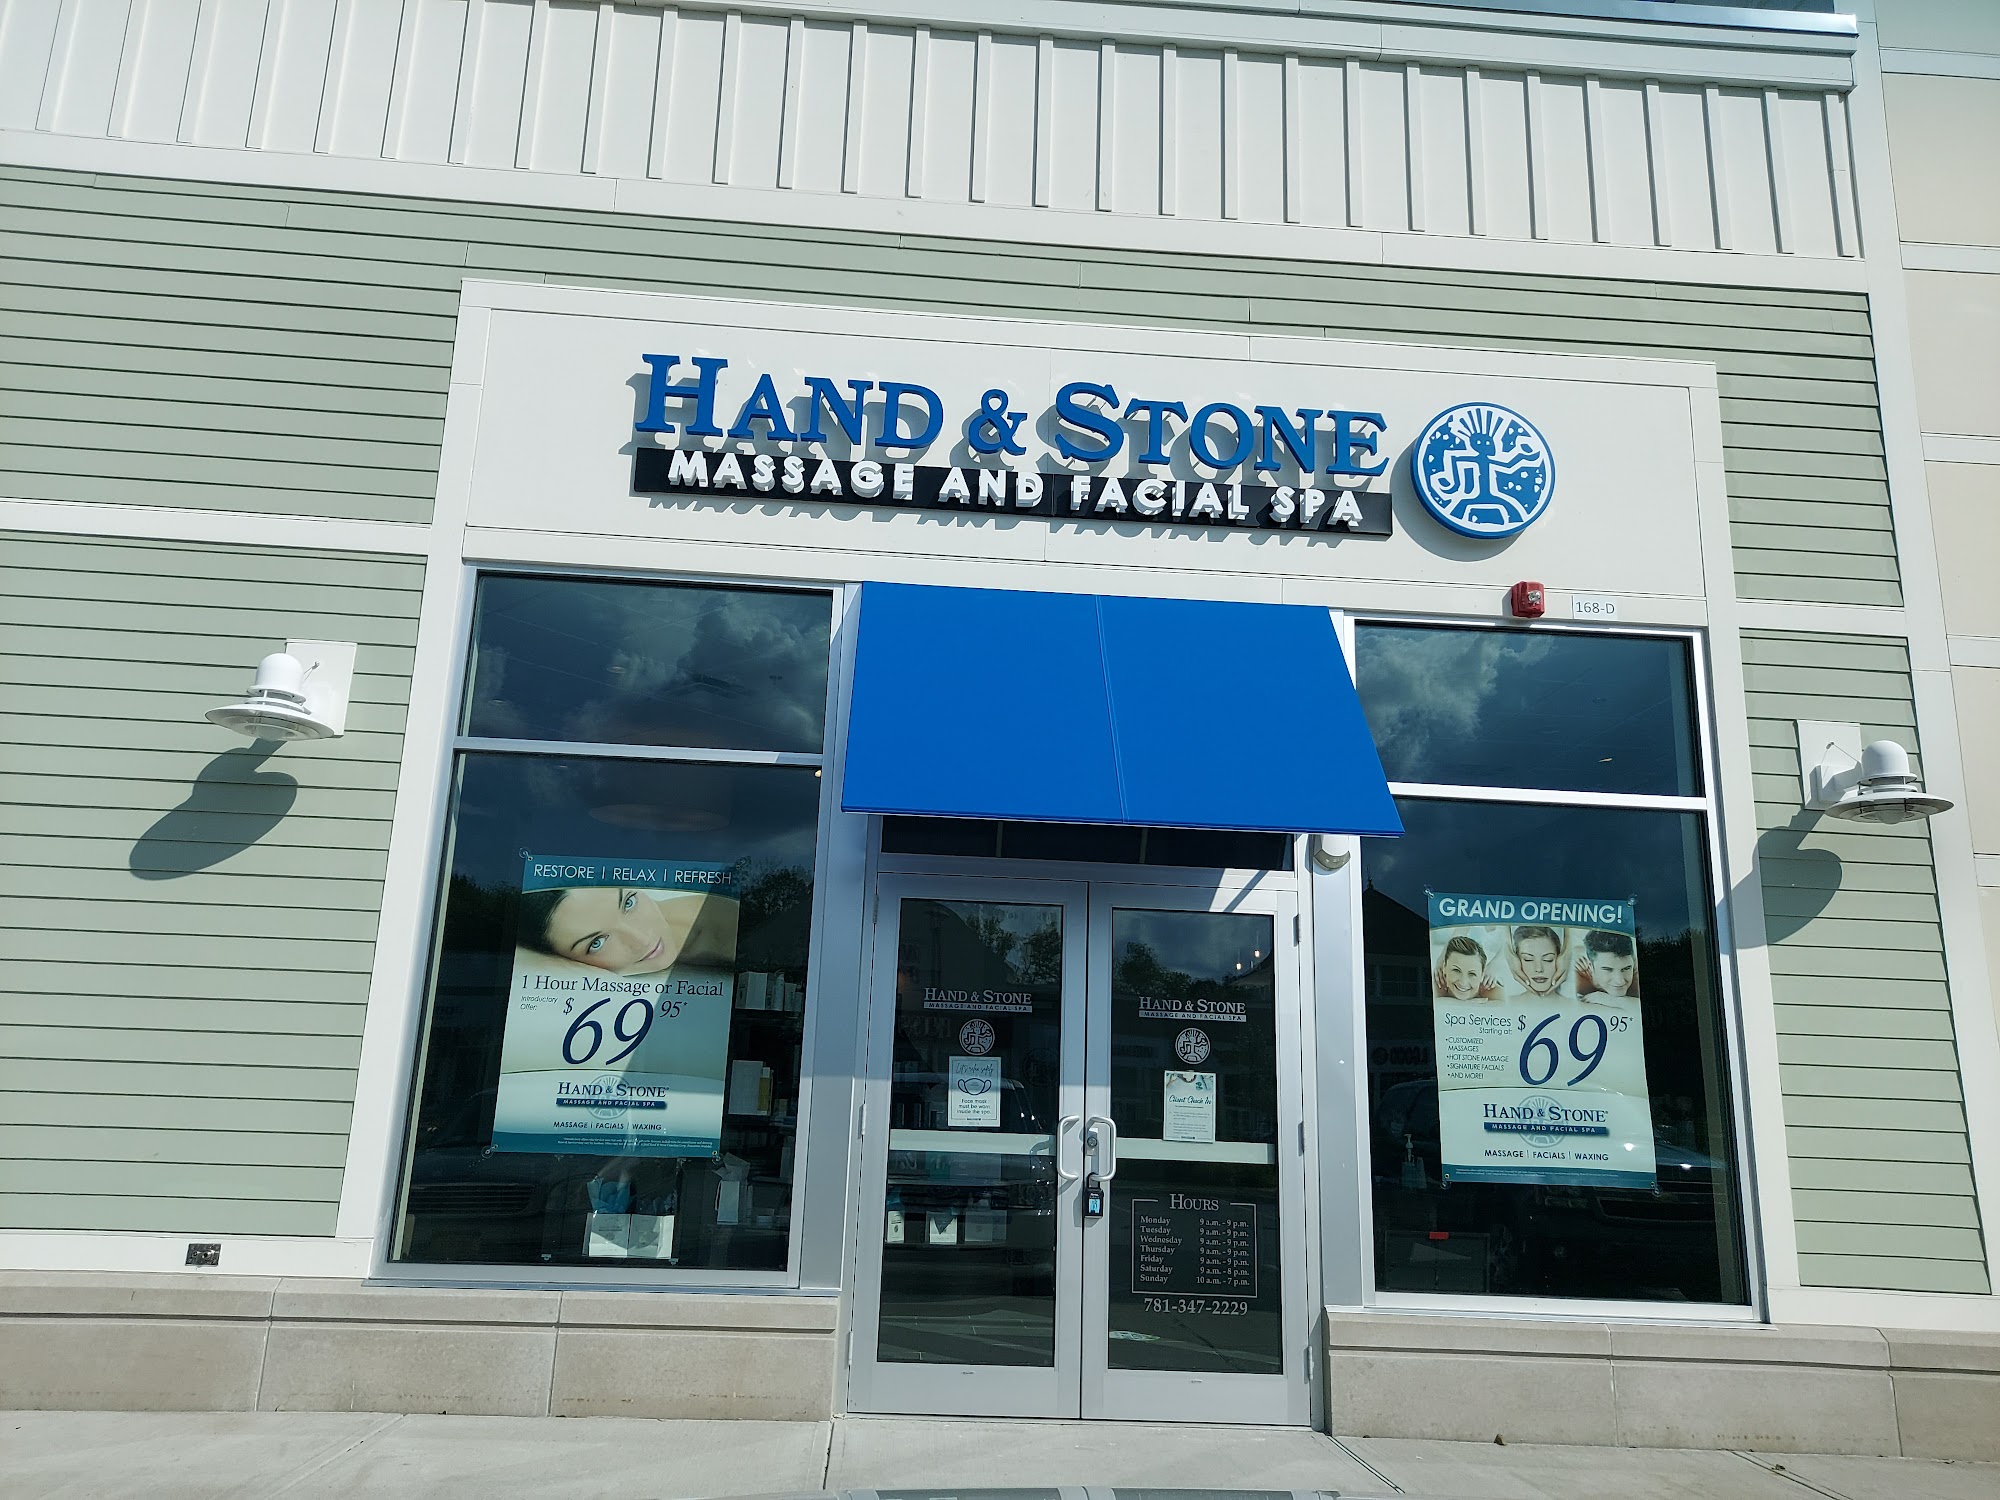 Hand and Stone Massage and Facial Spa 168 Great Rd Unit D, Bedford Massachusetts 01730